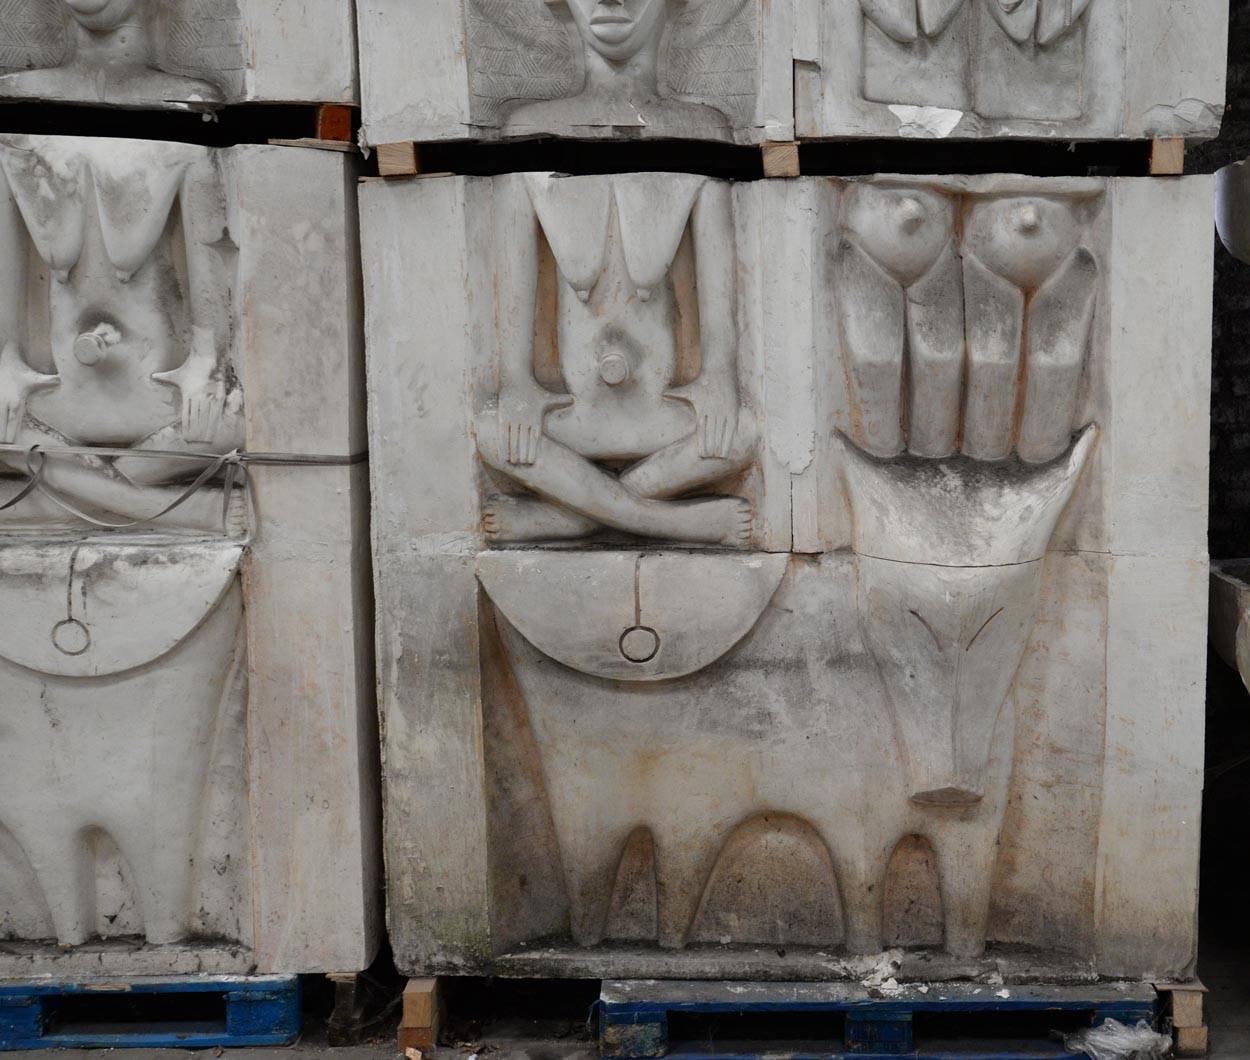 Molded Ethnic Style Monumental Decorative Elements in Plaster, 20th Century For Sale